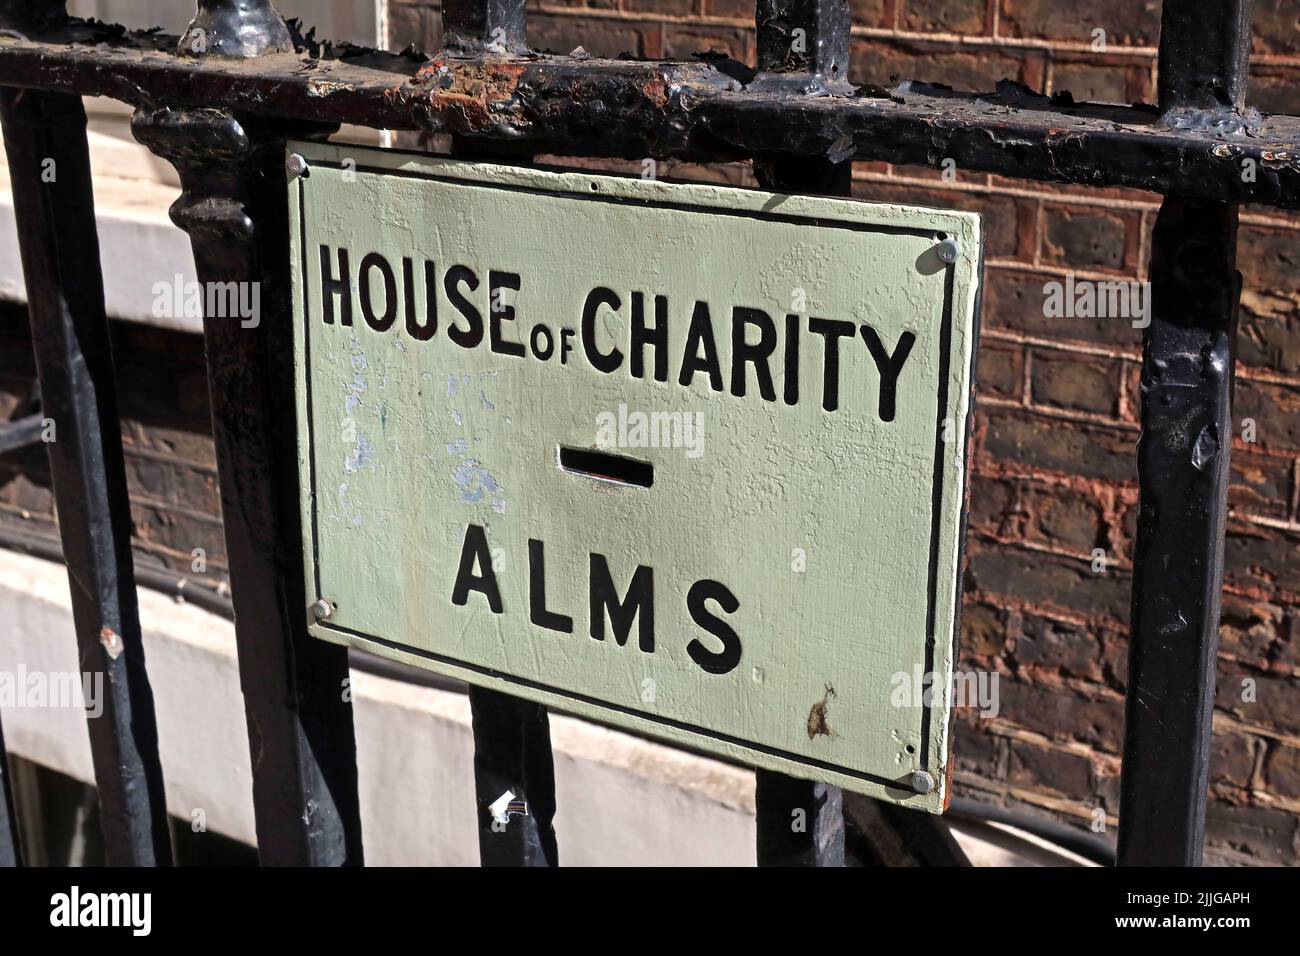 The penny chute, collection pipe, Alms for the House of Charity - The House of St Barnabas at 1, Greek Street, Soho, London, UK, W1D 4NQ Stock Photo